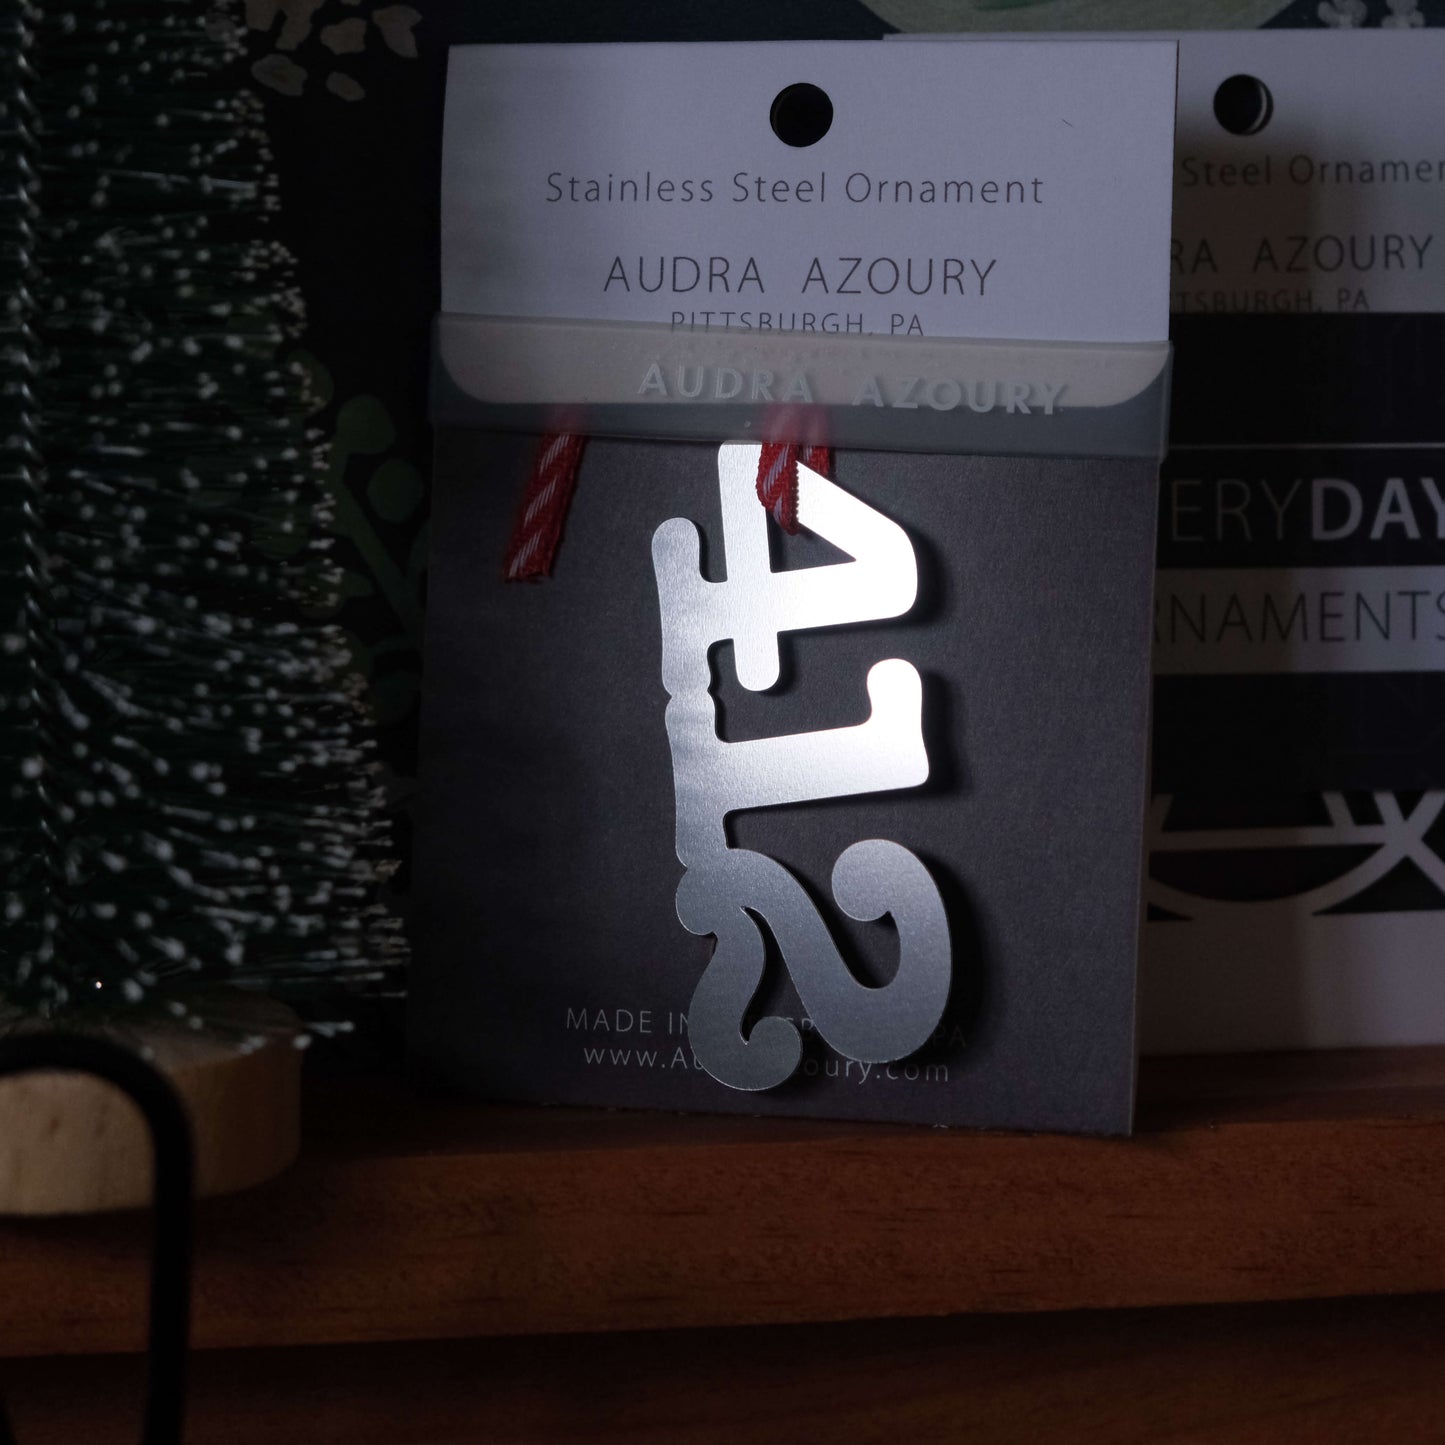 412 Pittsburgh Area Code Stainless Steel Ornament  by Audra Azoury